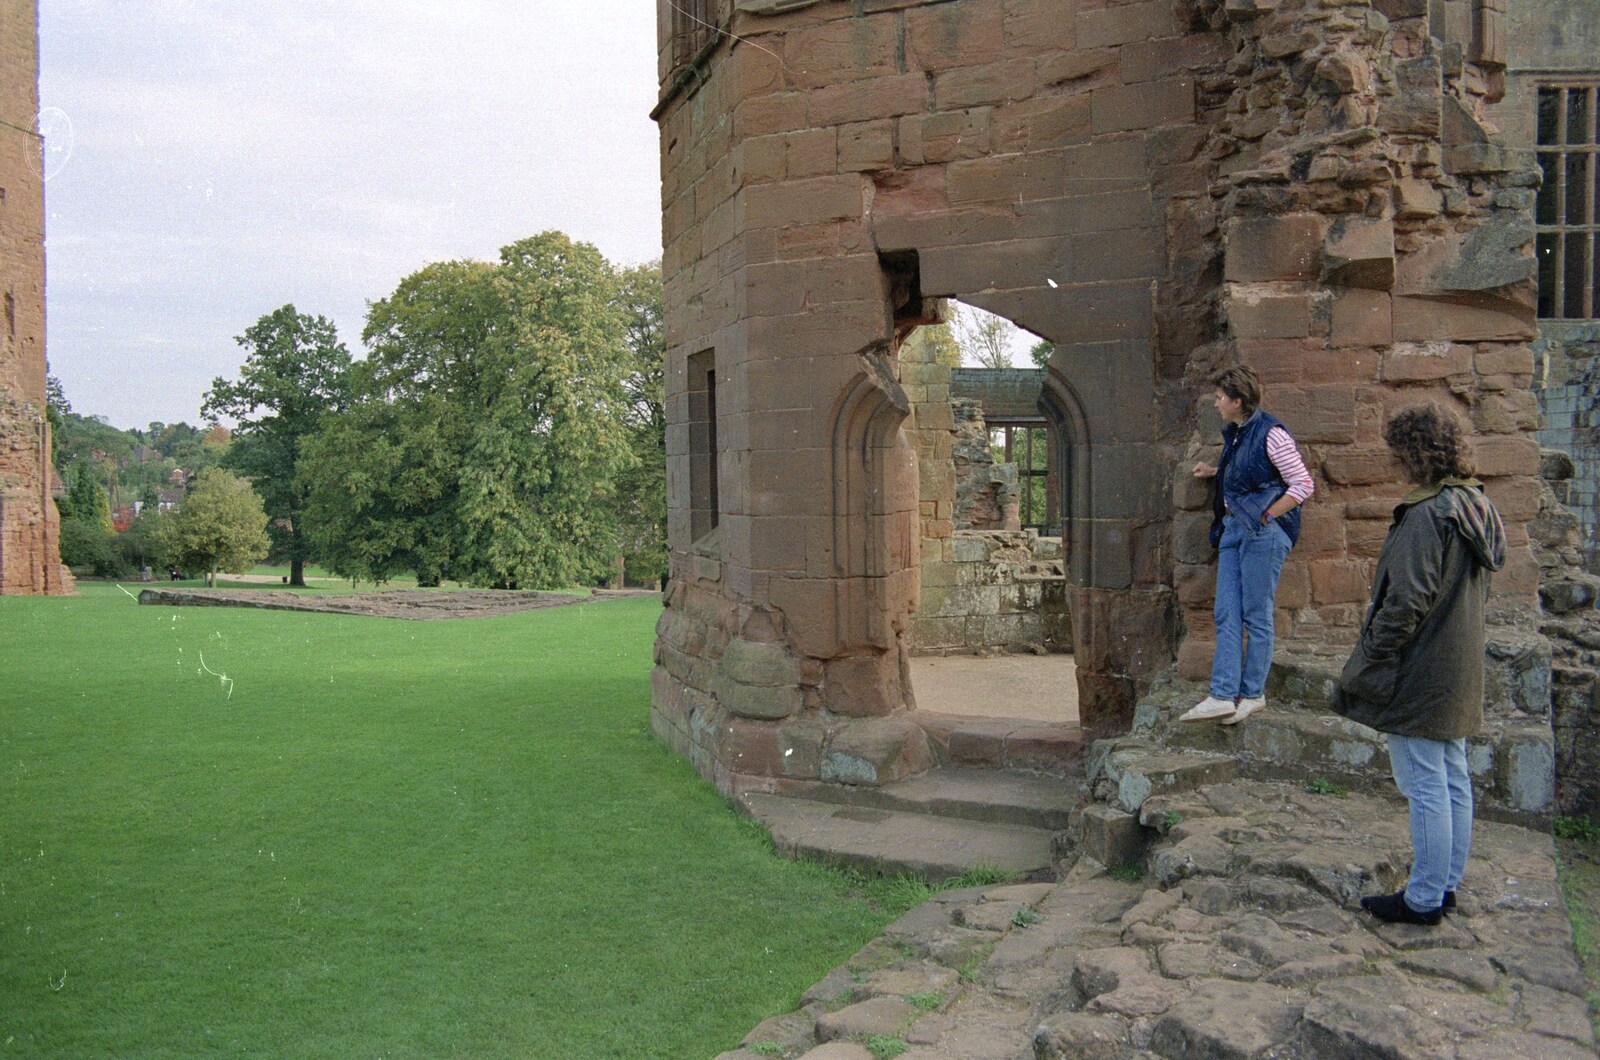 Poking around the ruined castle walls from A Trip to Kenilworth, Warwickshire - 21st September 1989